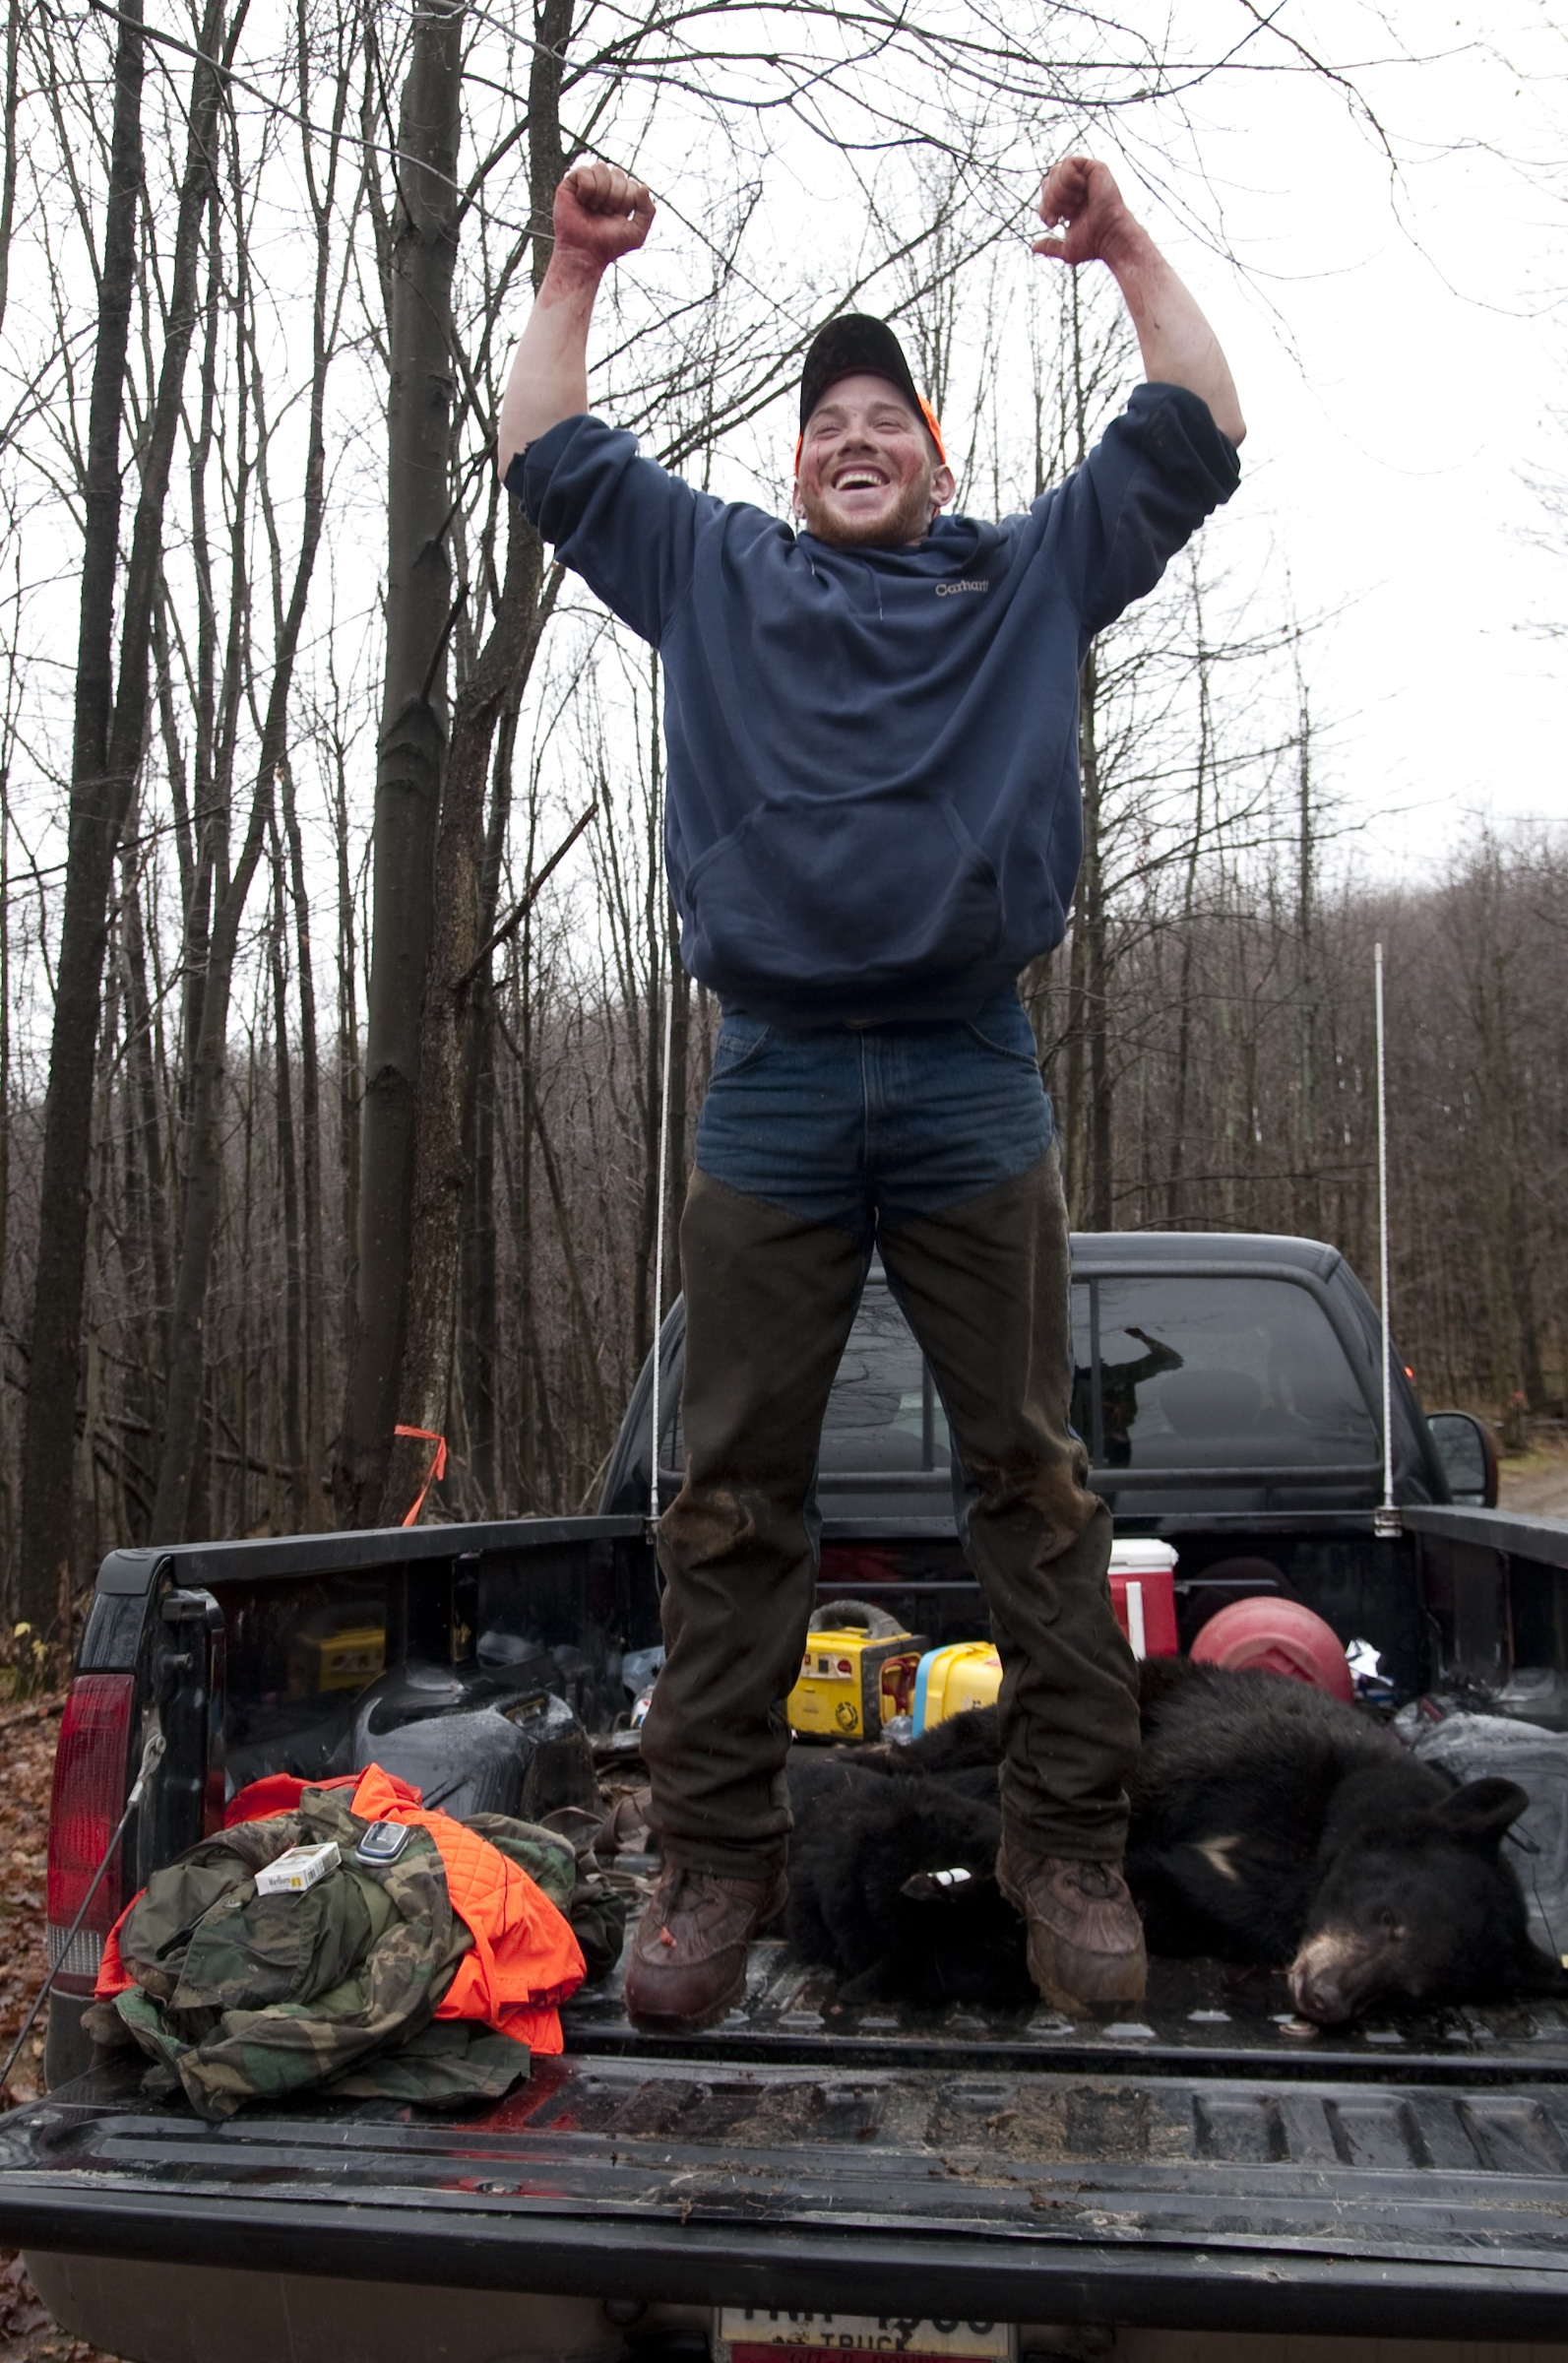 Matt Heinaman couldn't hide his enthusiasm after taking his first-ever black bear.